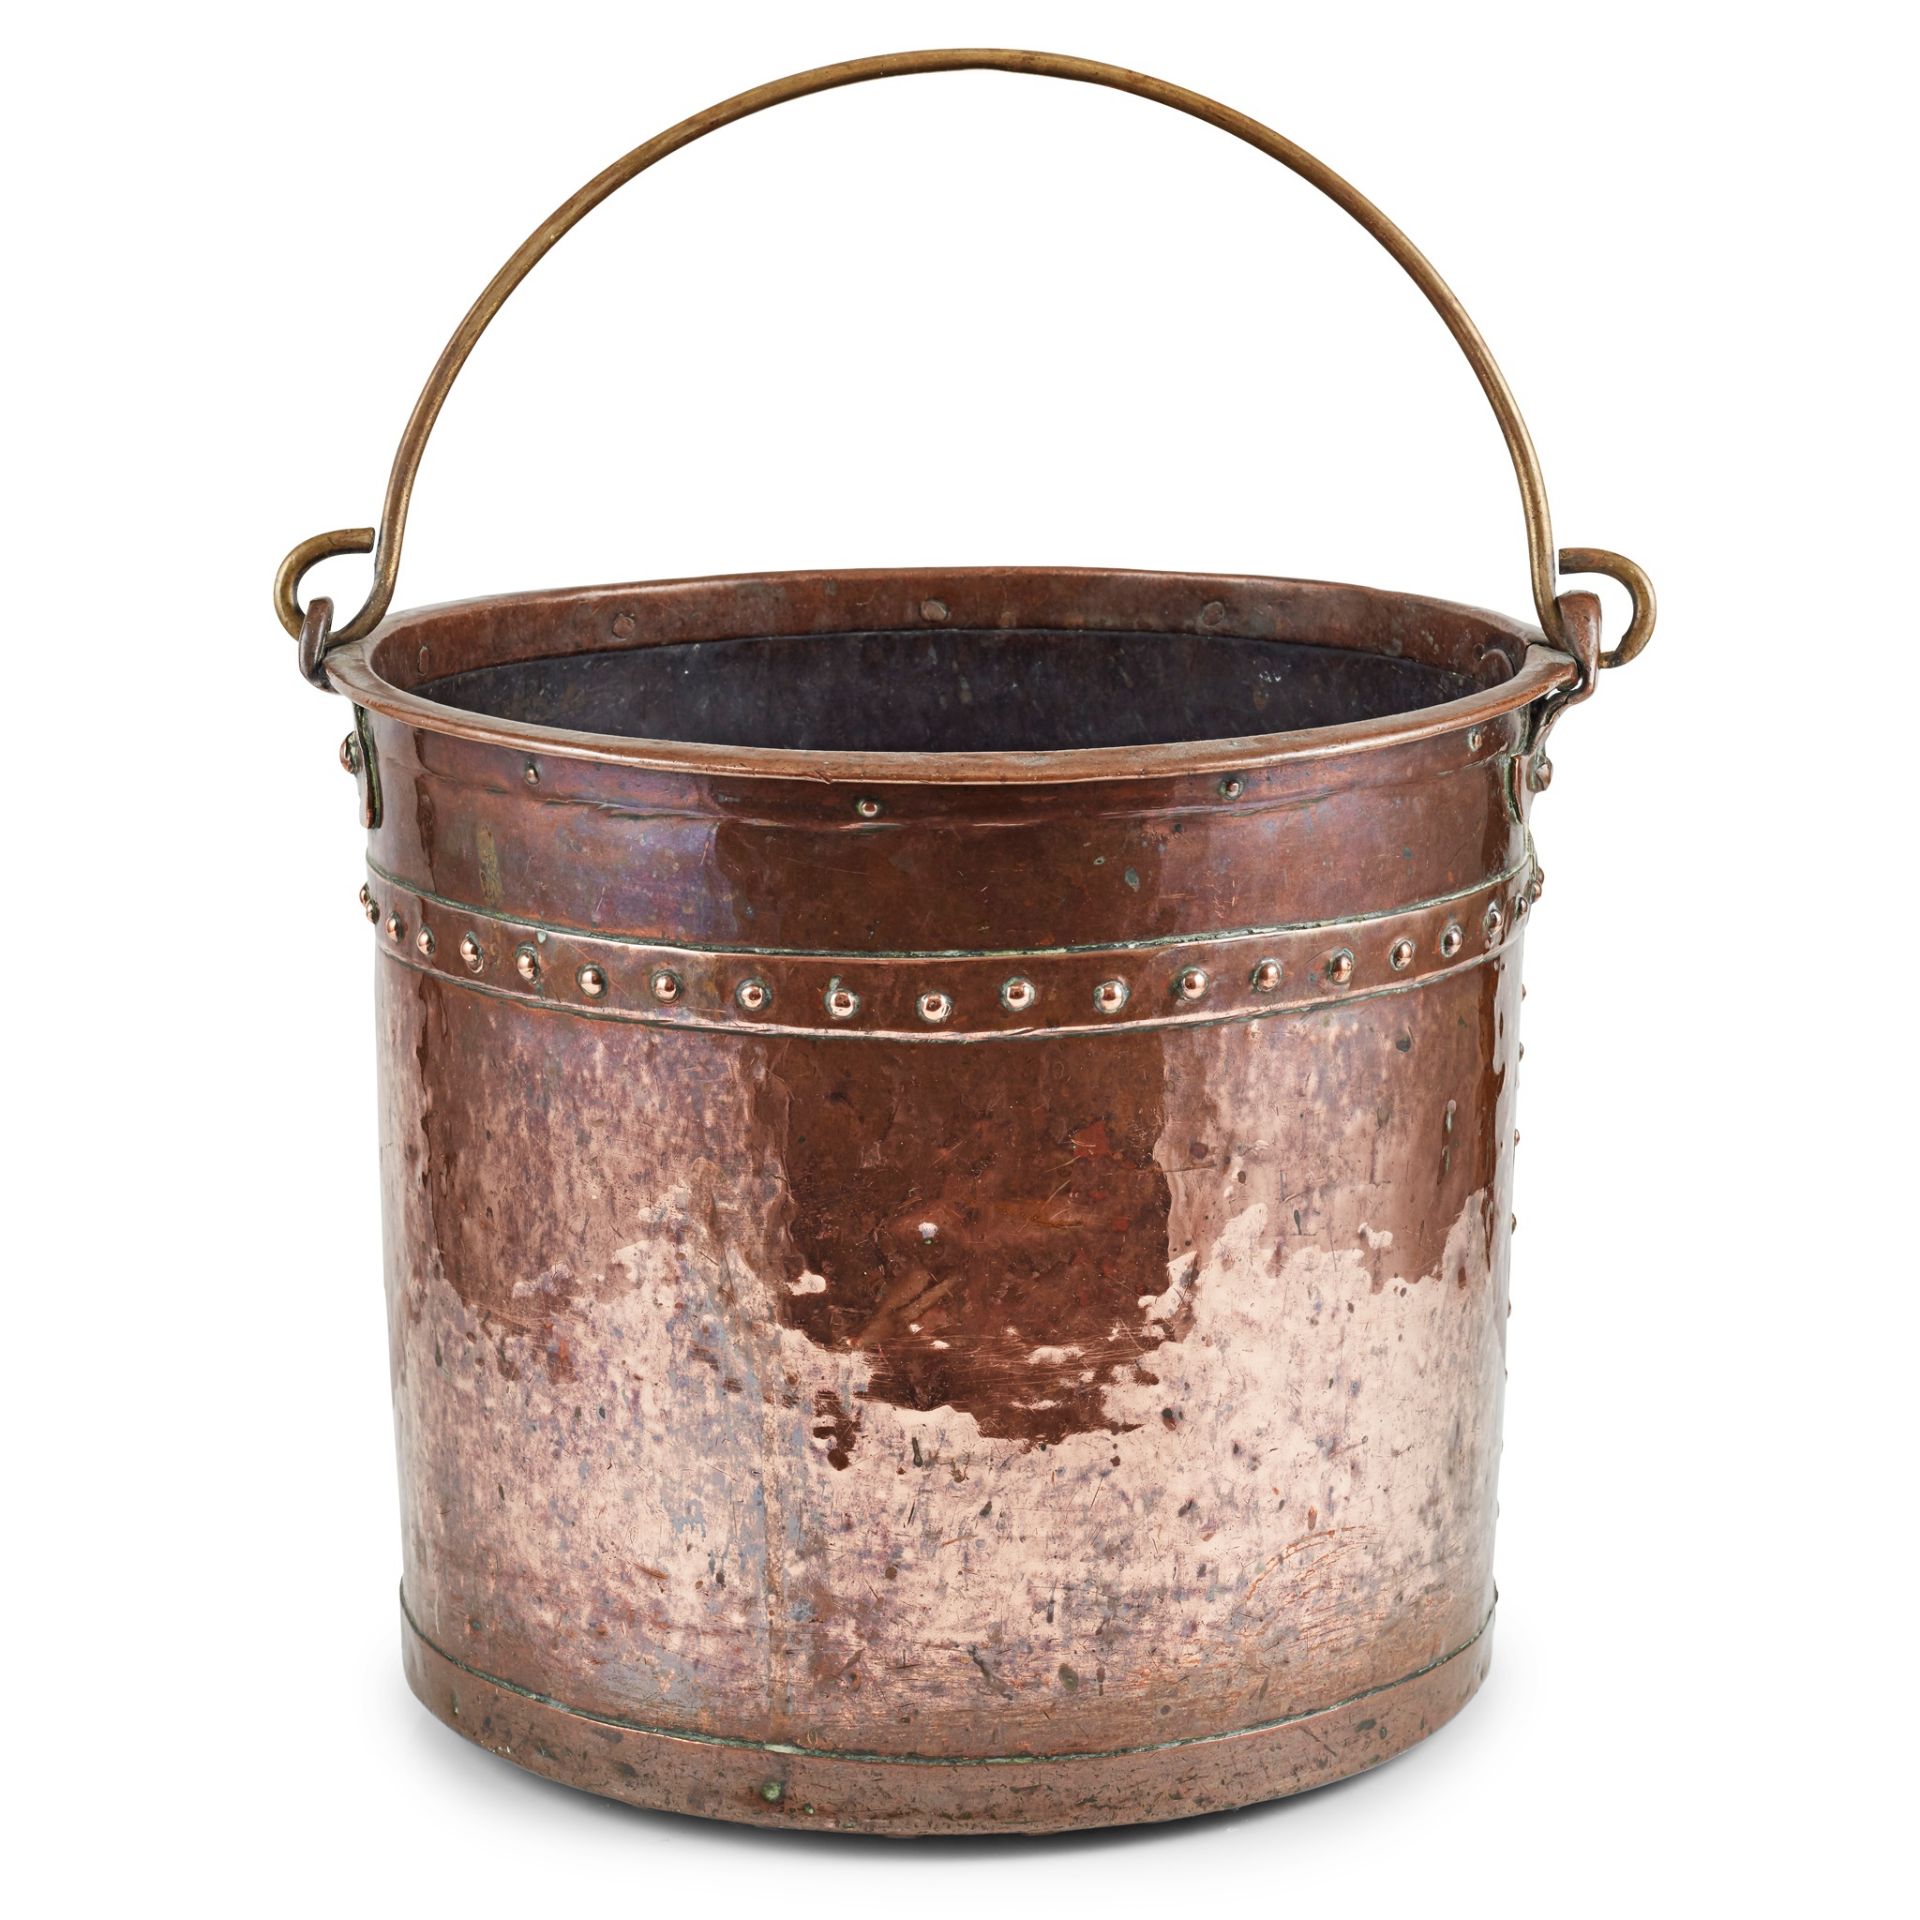 DUTCH COPPER AND BRASS MILK PAIL EARLY 19TH CENTURY